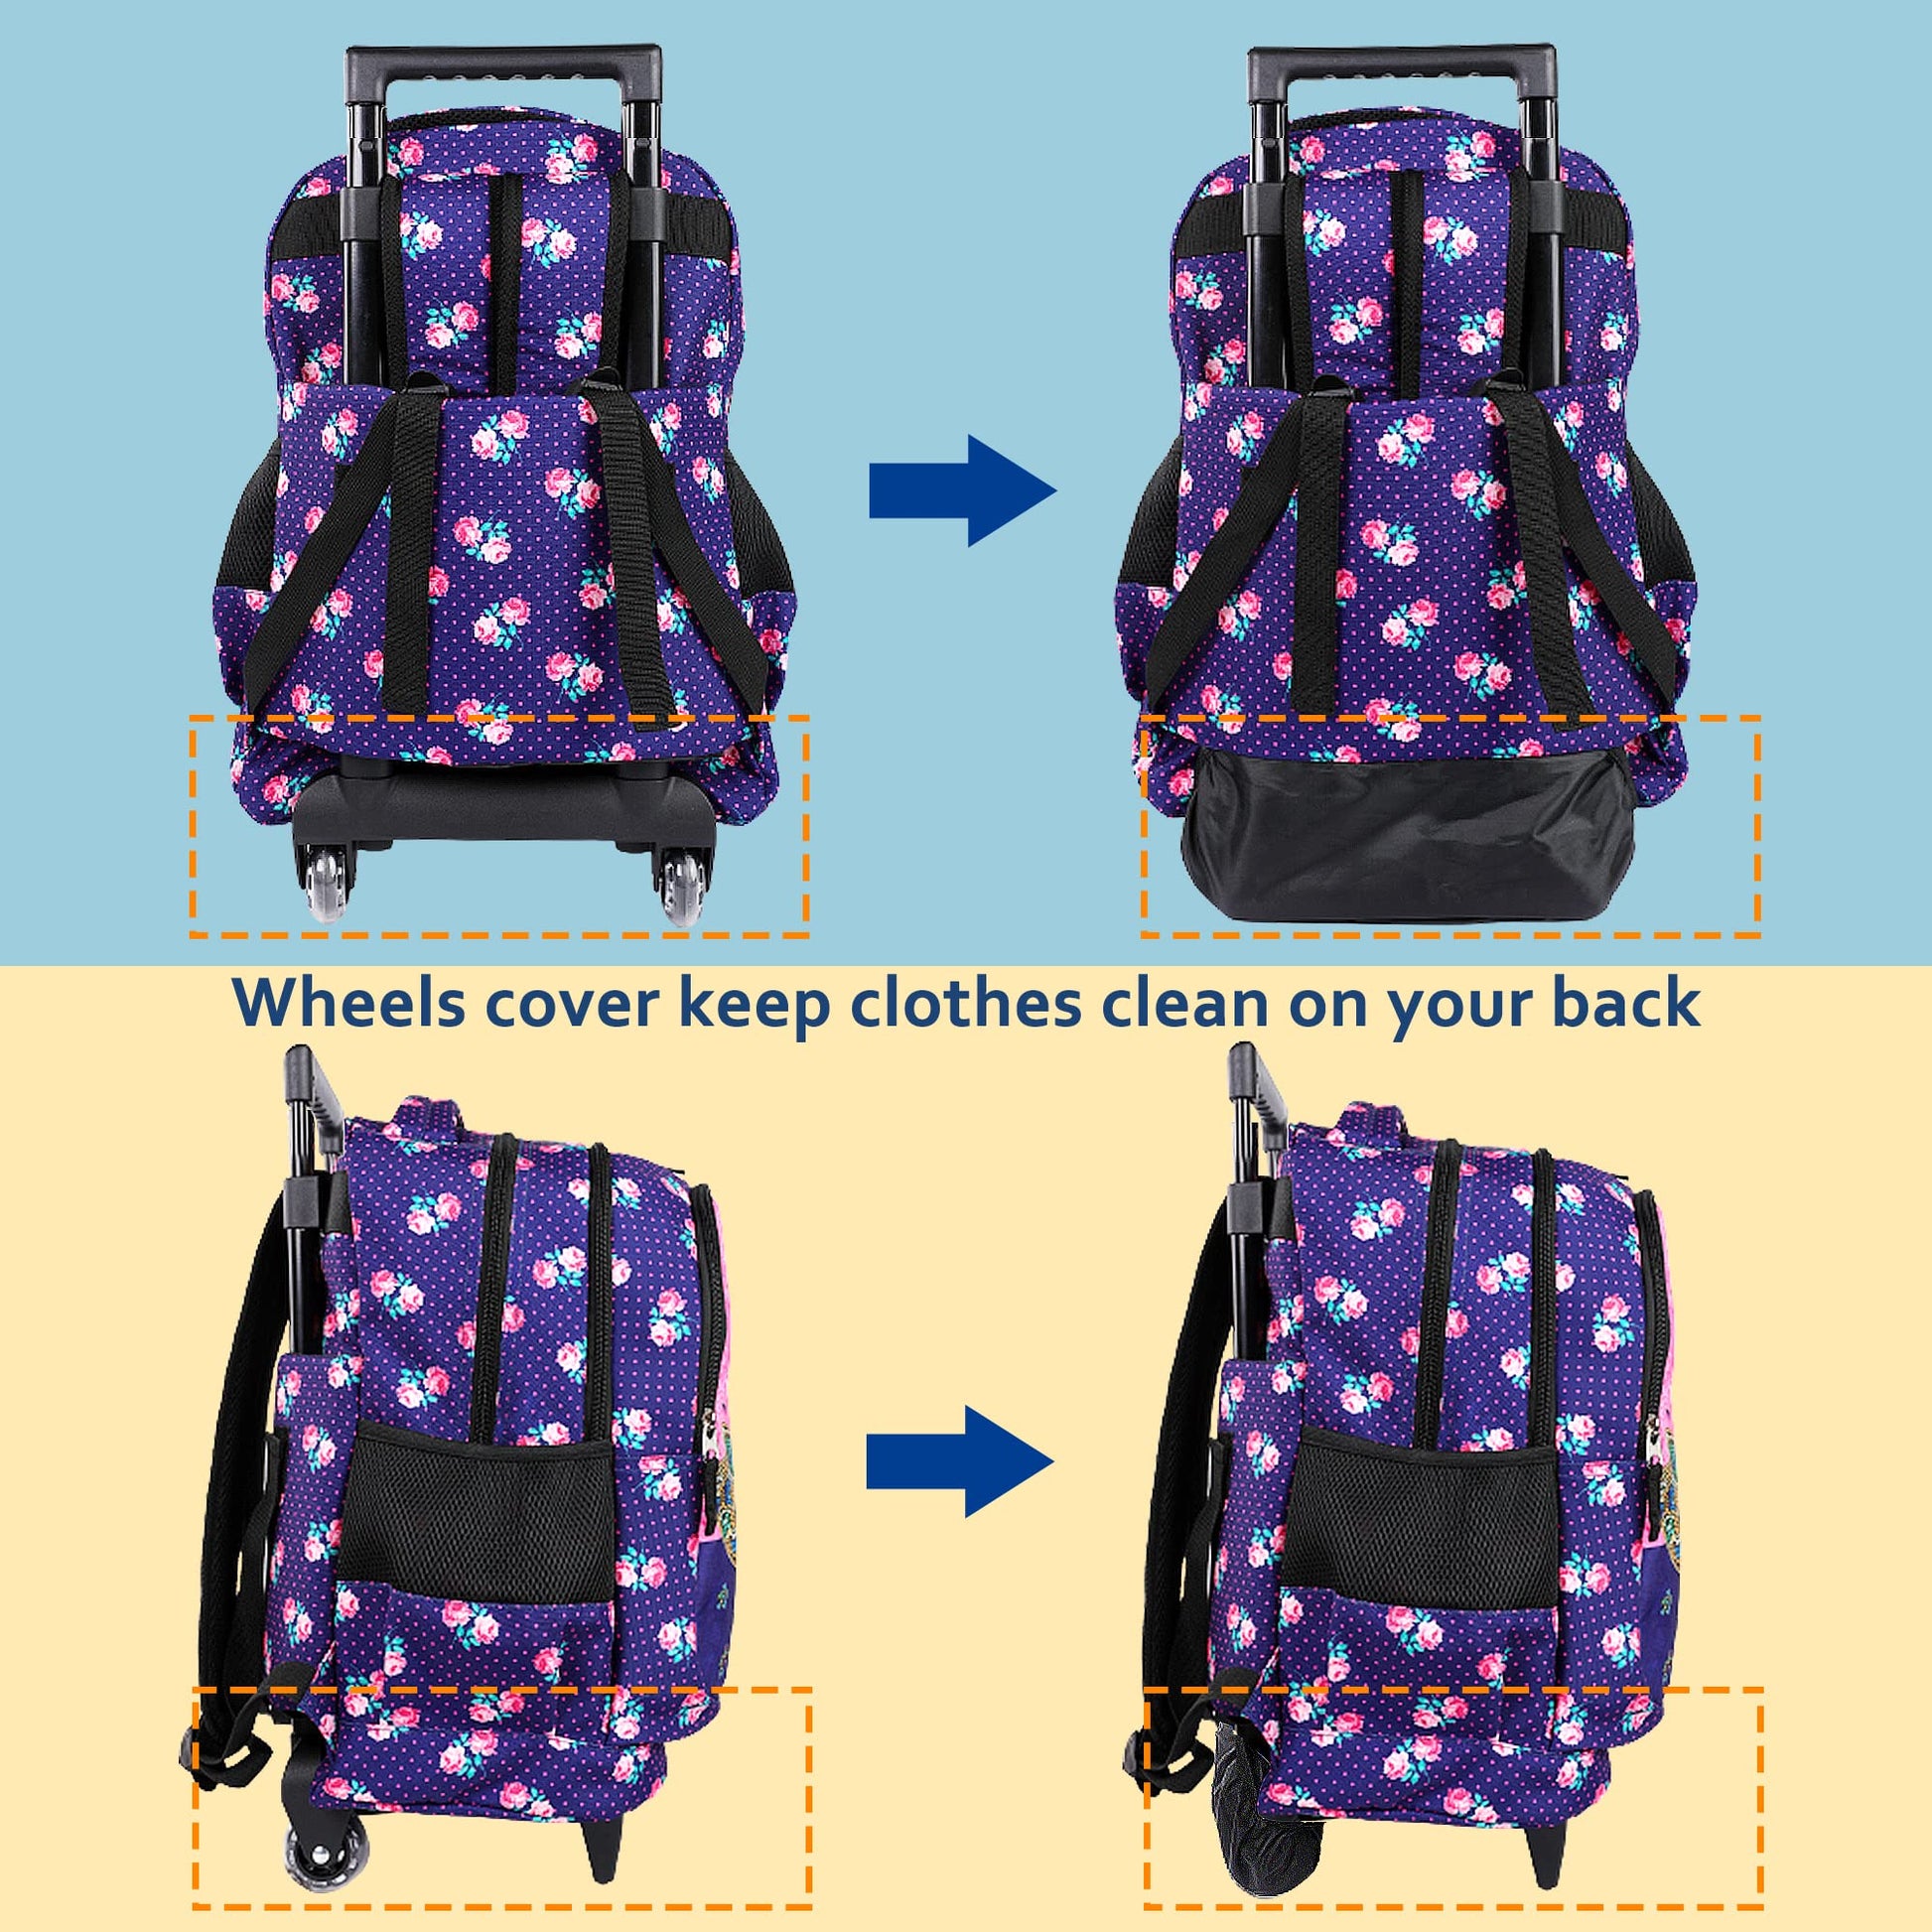 seastig Rolling Backpack for Kids Wheeled Backpack Double Handle Wheeled Backpack with Lunch Bag and Pencil Case Set